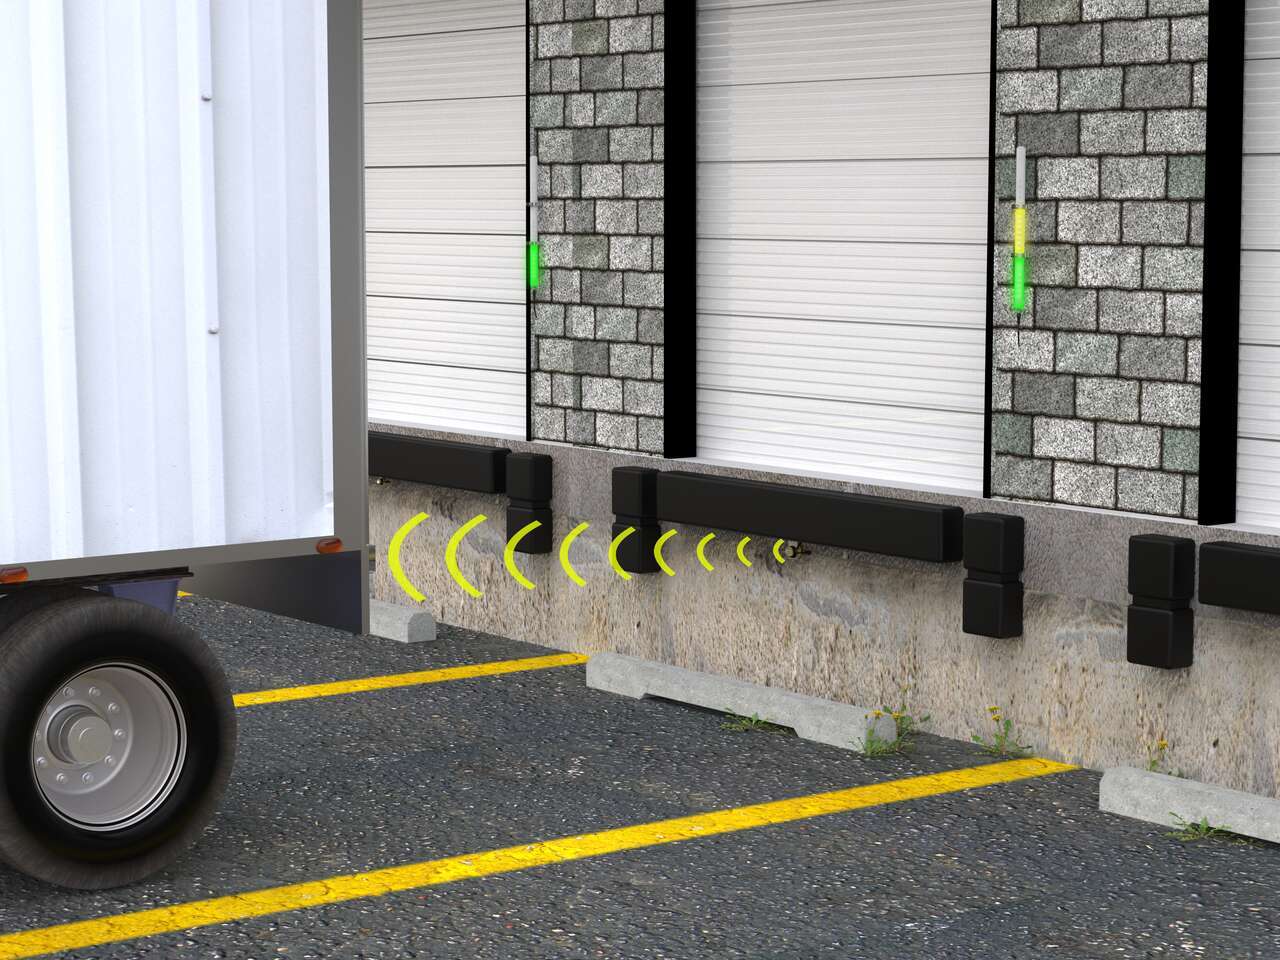 Using Radar Distance Measurement while Backing a Truck into a Loading Dock